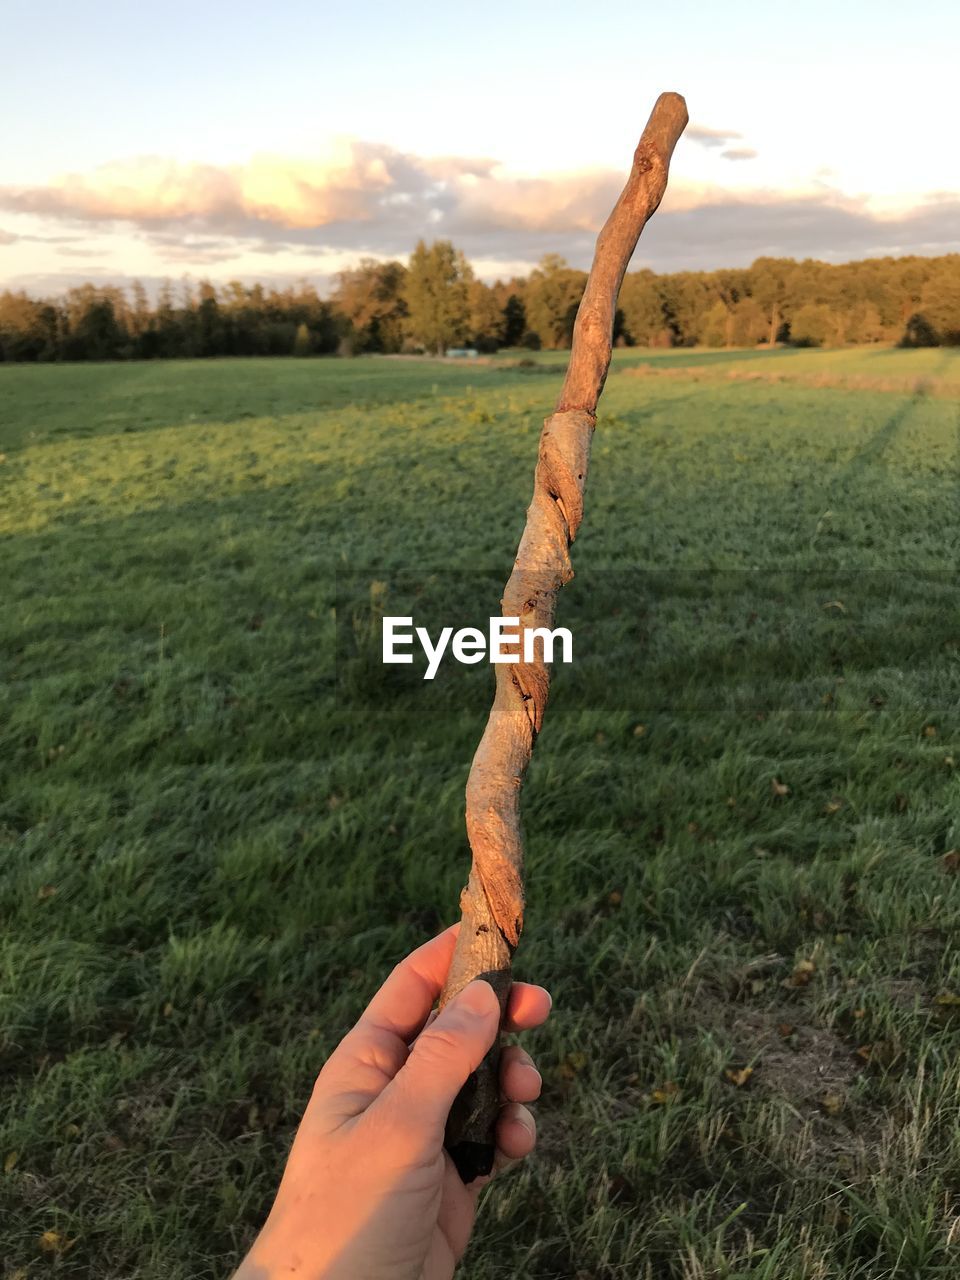 Cropped hand holding stick against field